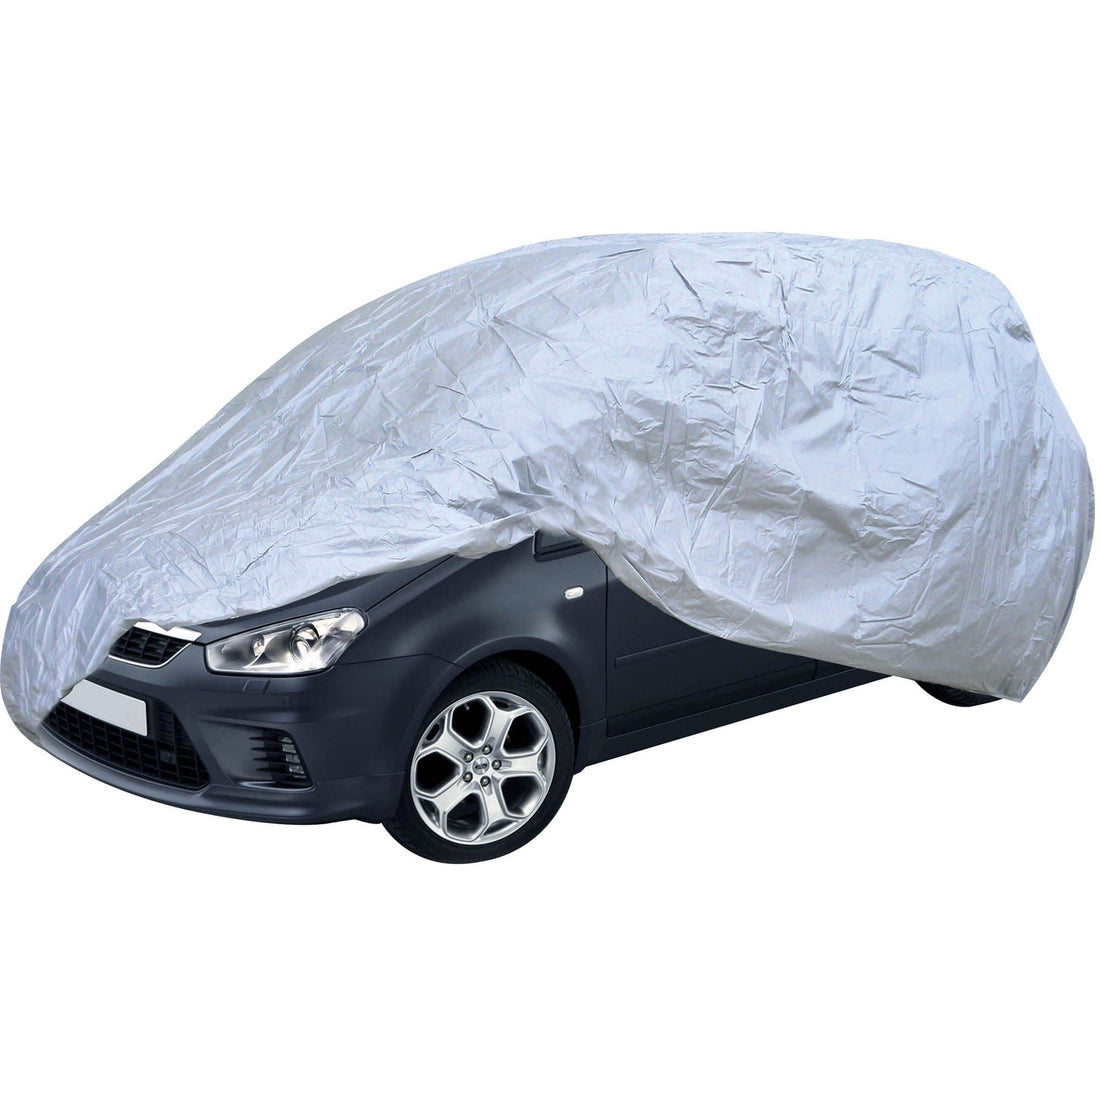 WATERPROOF CAR COVER SIZE XL